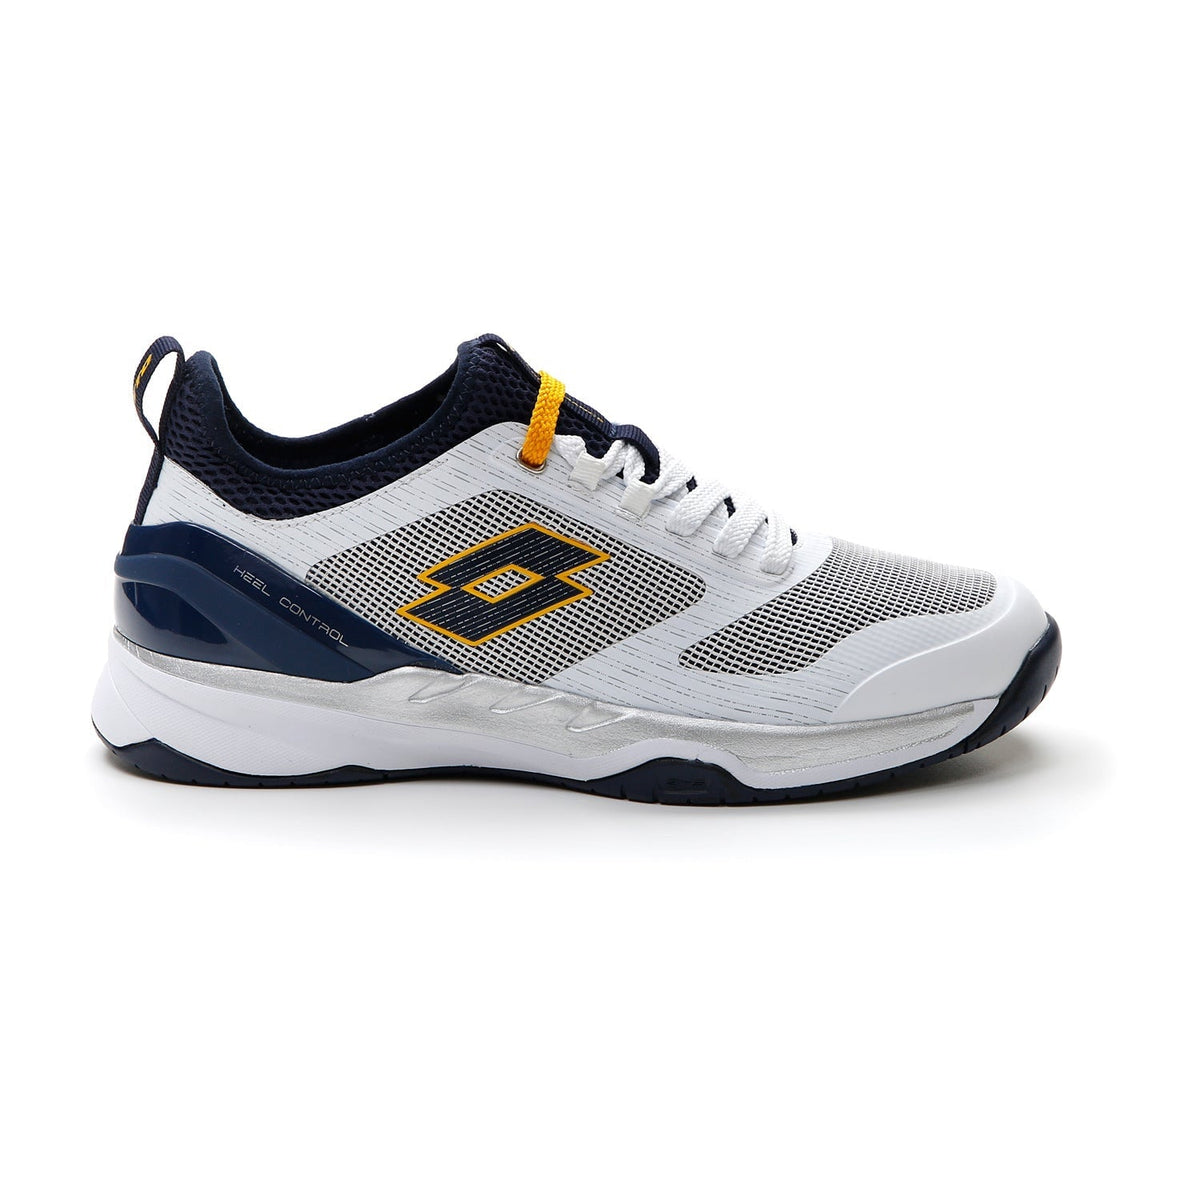 Buy All court shoes from Lotto online | Tennis-Point